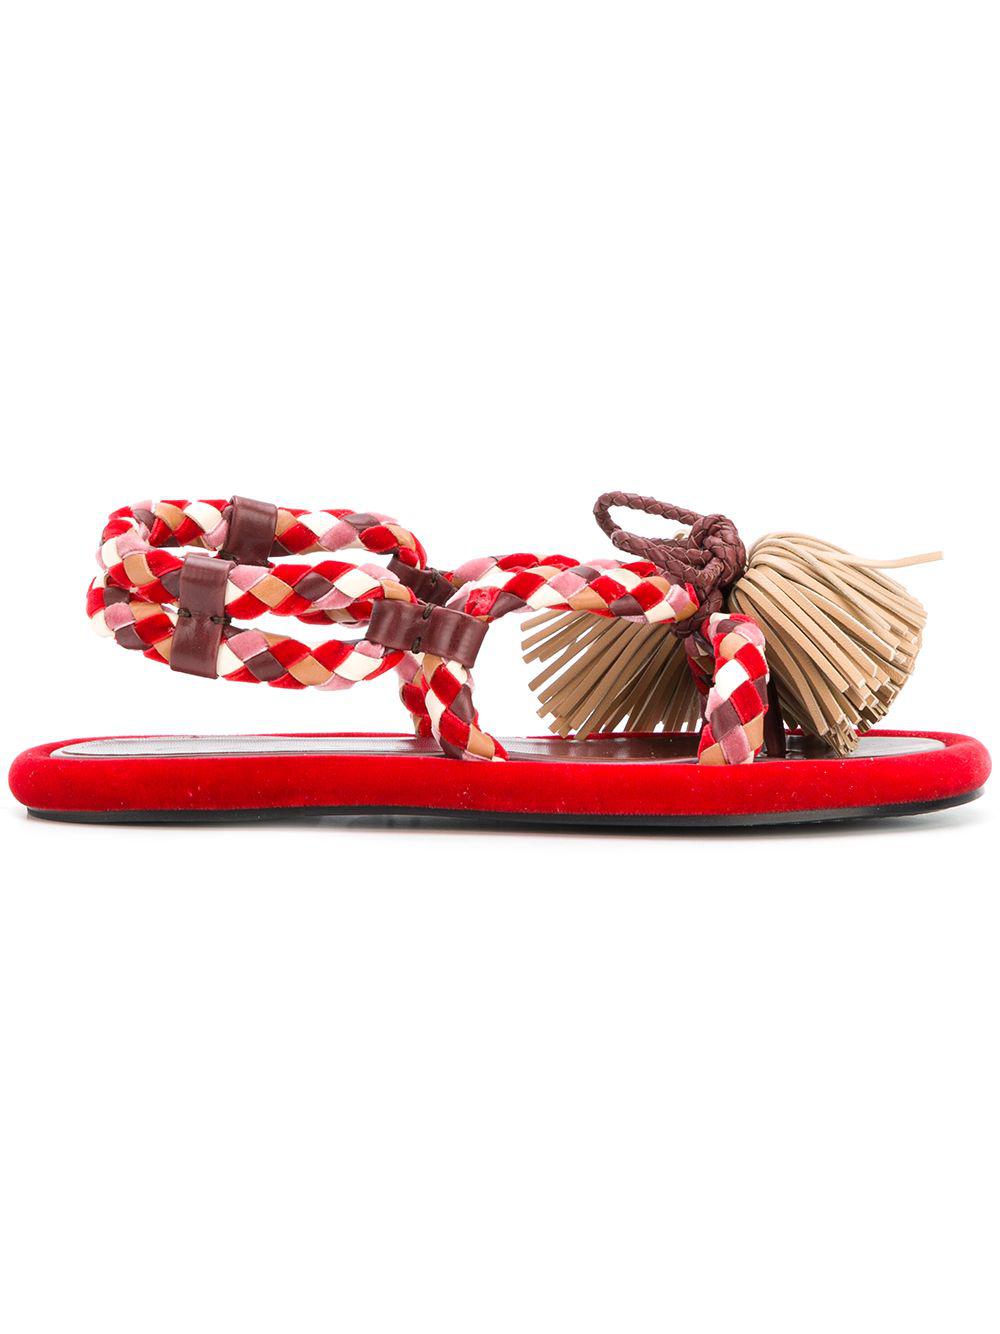 red rope sandals